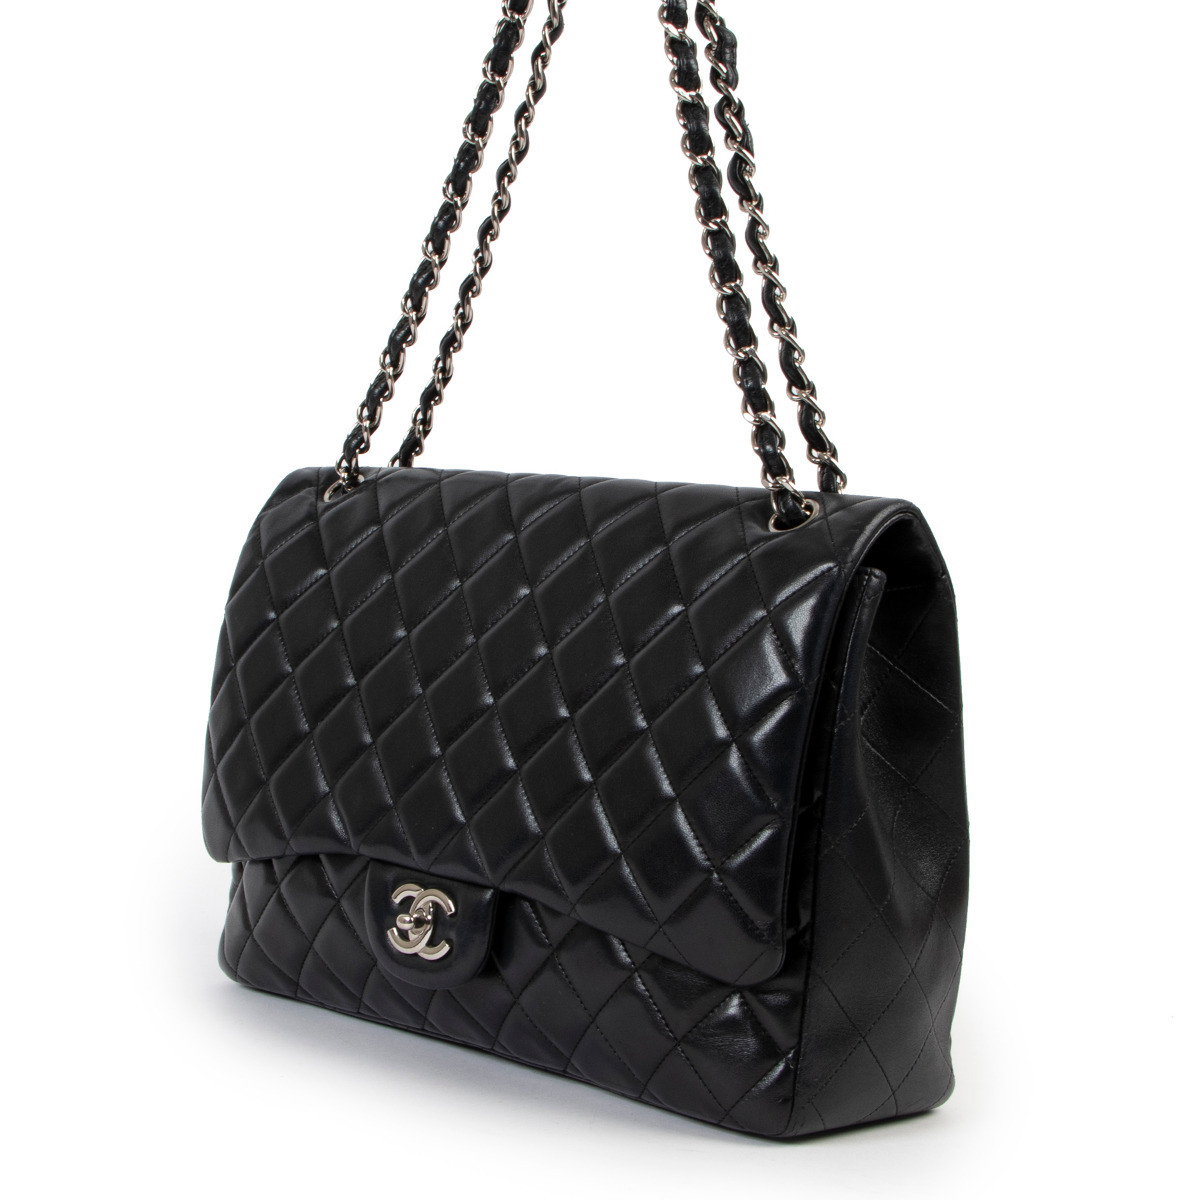 Authentic Chanel Black Lambskin Leather Quilted Single Flap Classic Maxi Bag